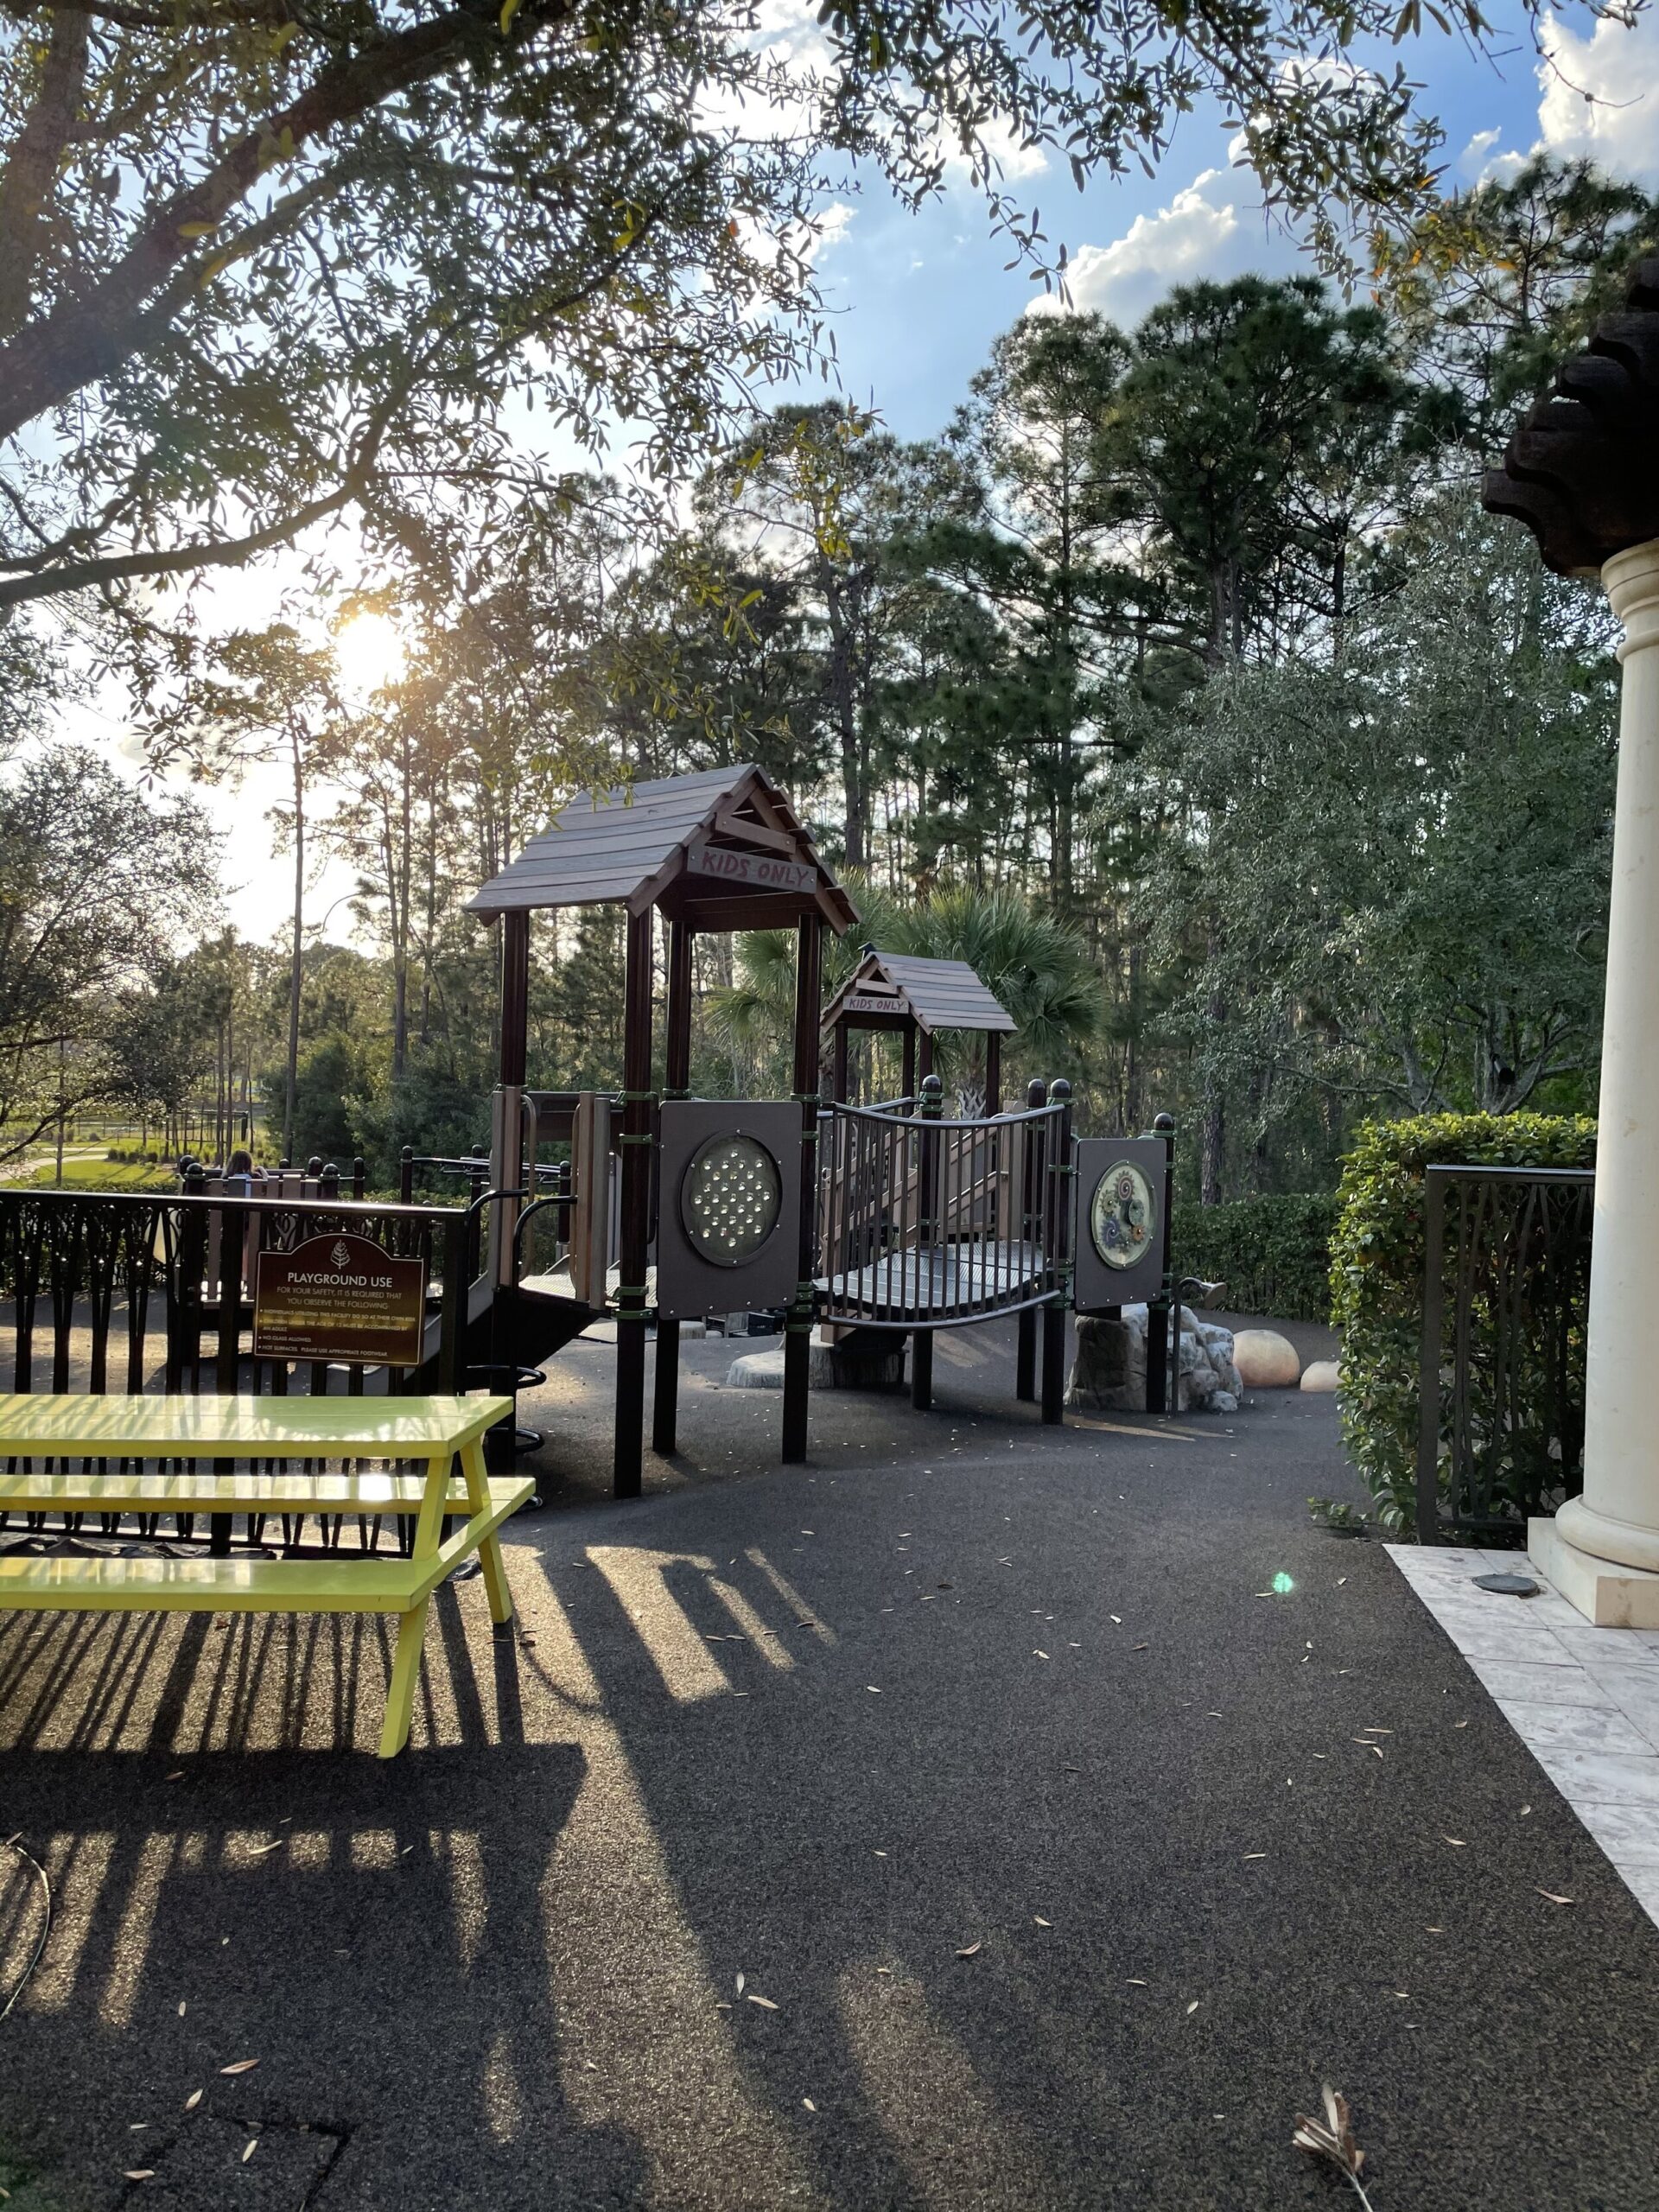 This playground area is right next to the explorer pool, which is perfect for the kids to retreat to when they want a break from the water, but they are still in close proximity for me to keep an eye on them.